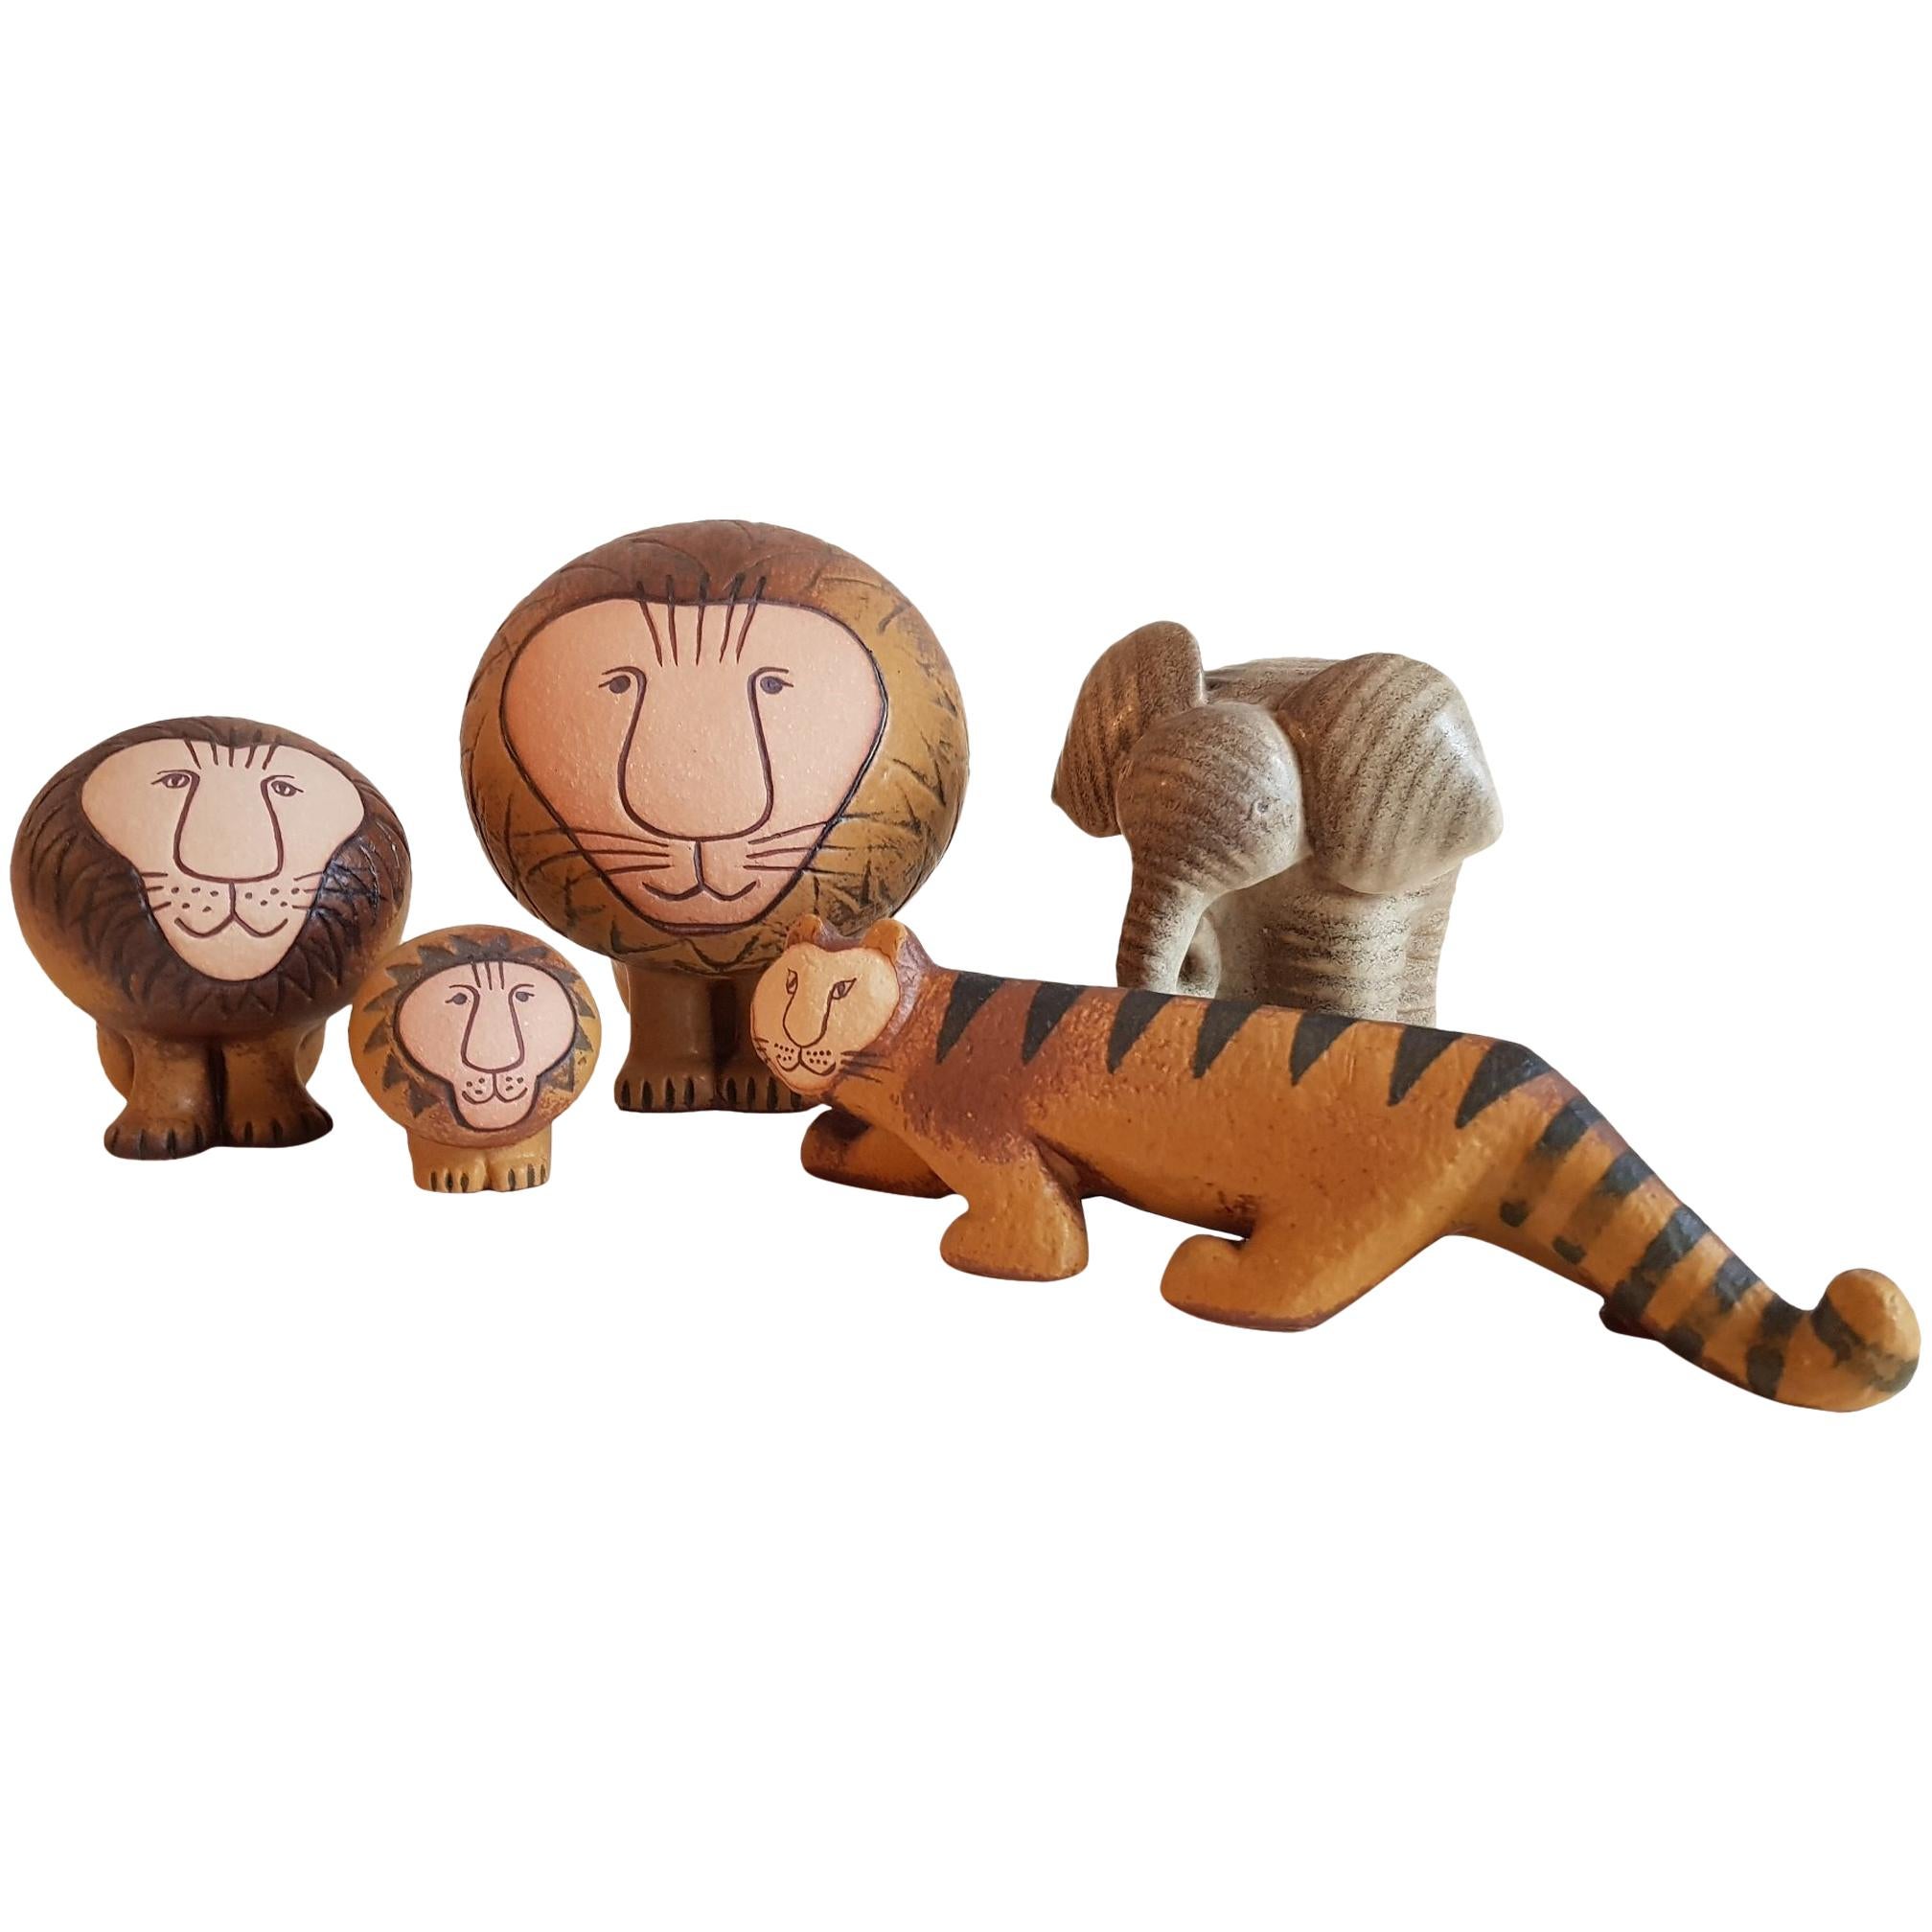 Lisa Larson Gustavsberg Stoneware Group of Animals - 3 Lions, Tiger and Elephant For Sale